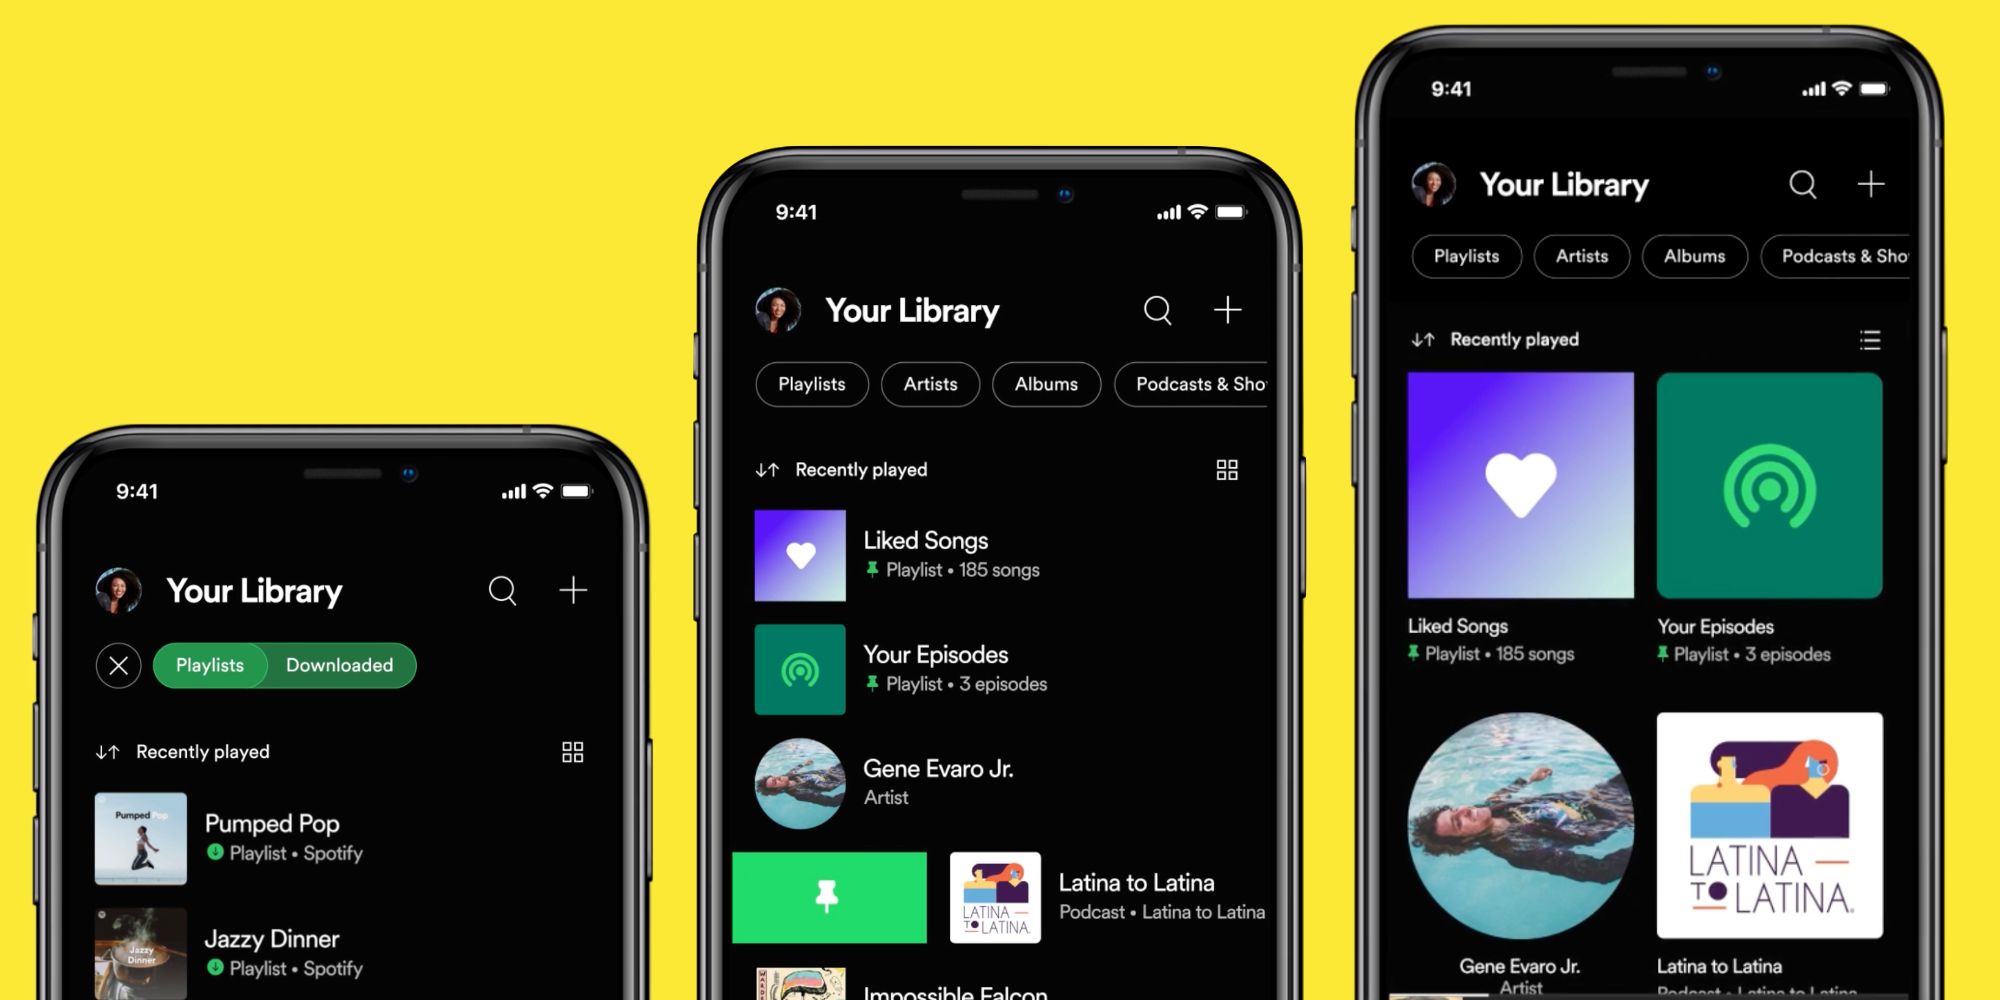 New features in the Spotify Your Library update announced in April 2021